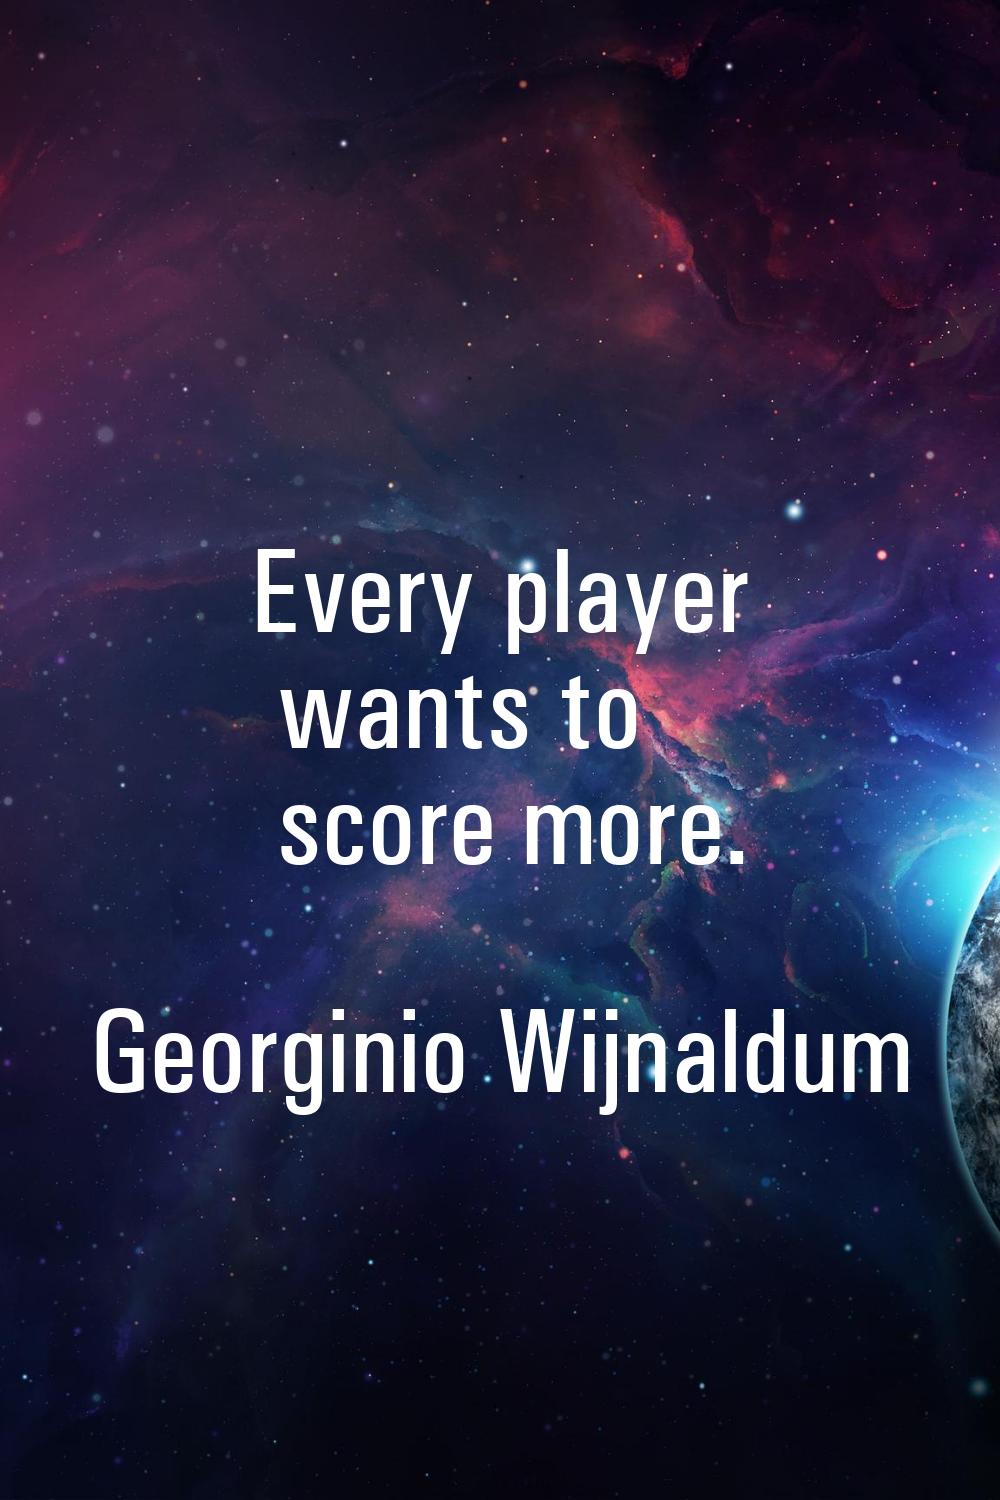 Every player wants to score more.